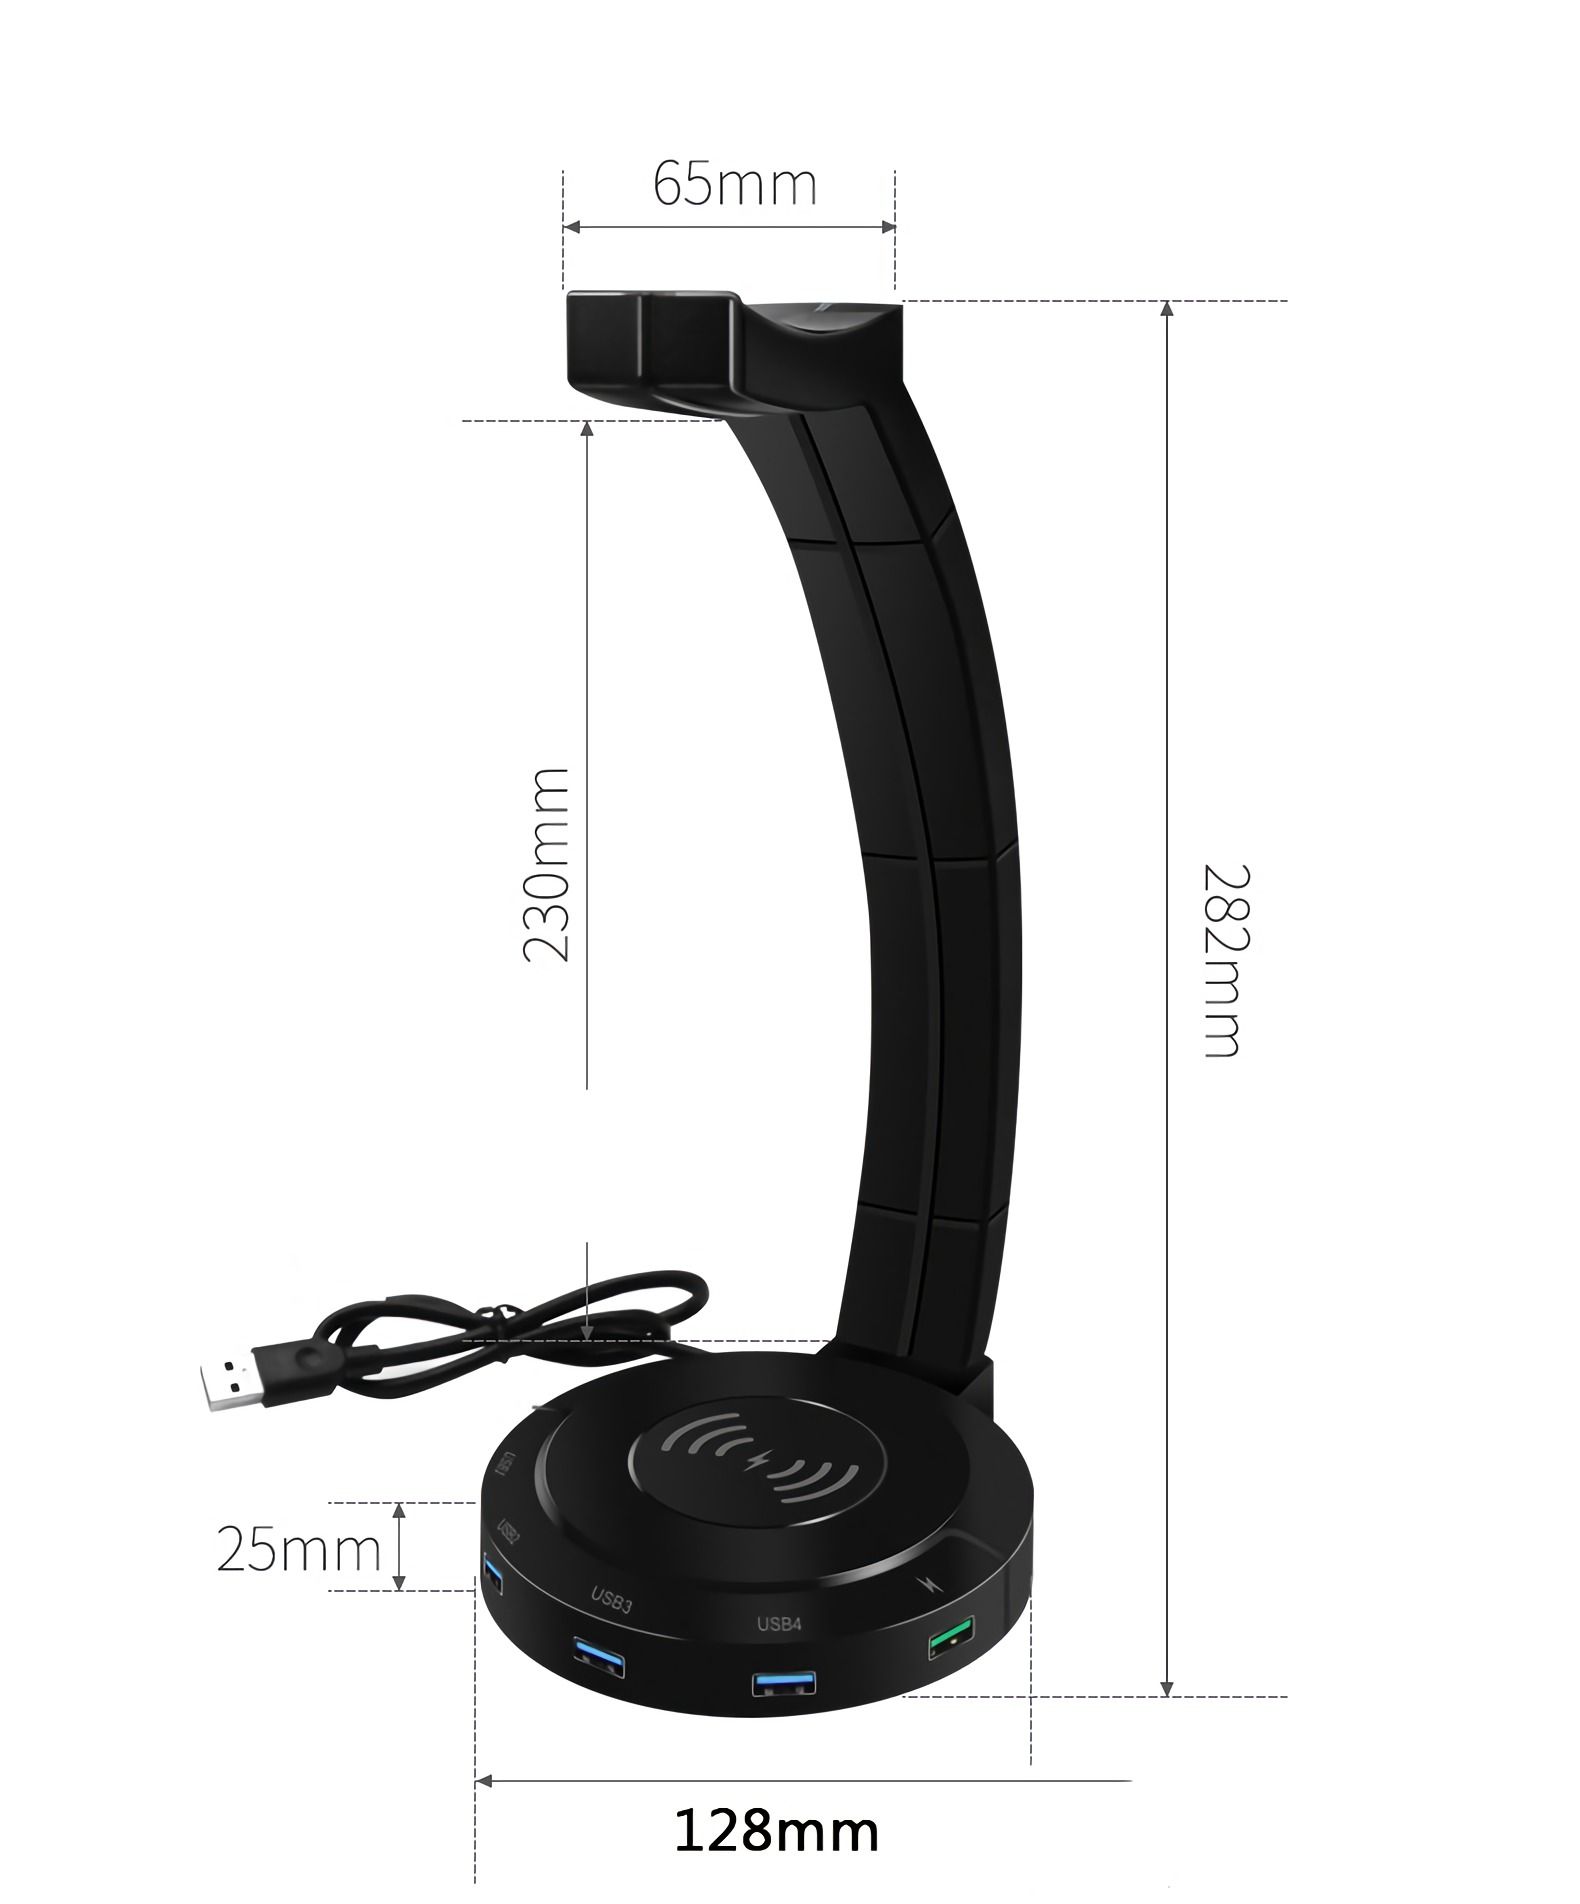 Headphone-Stand-with-Wireless-Fast-Charging-USB2030-Charging-Port-Table-Organizer-1665499